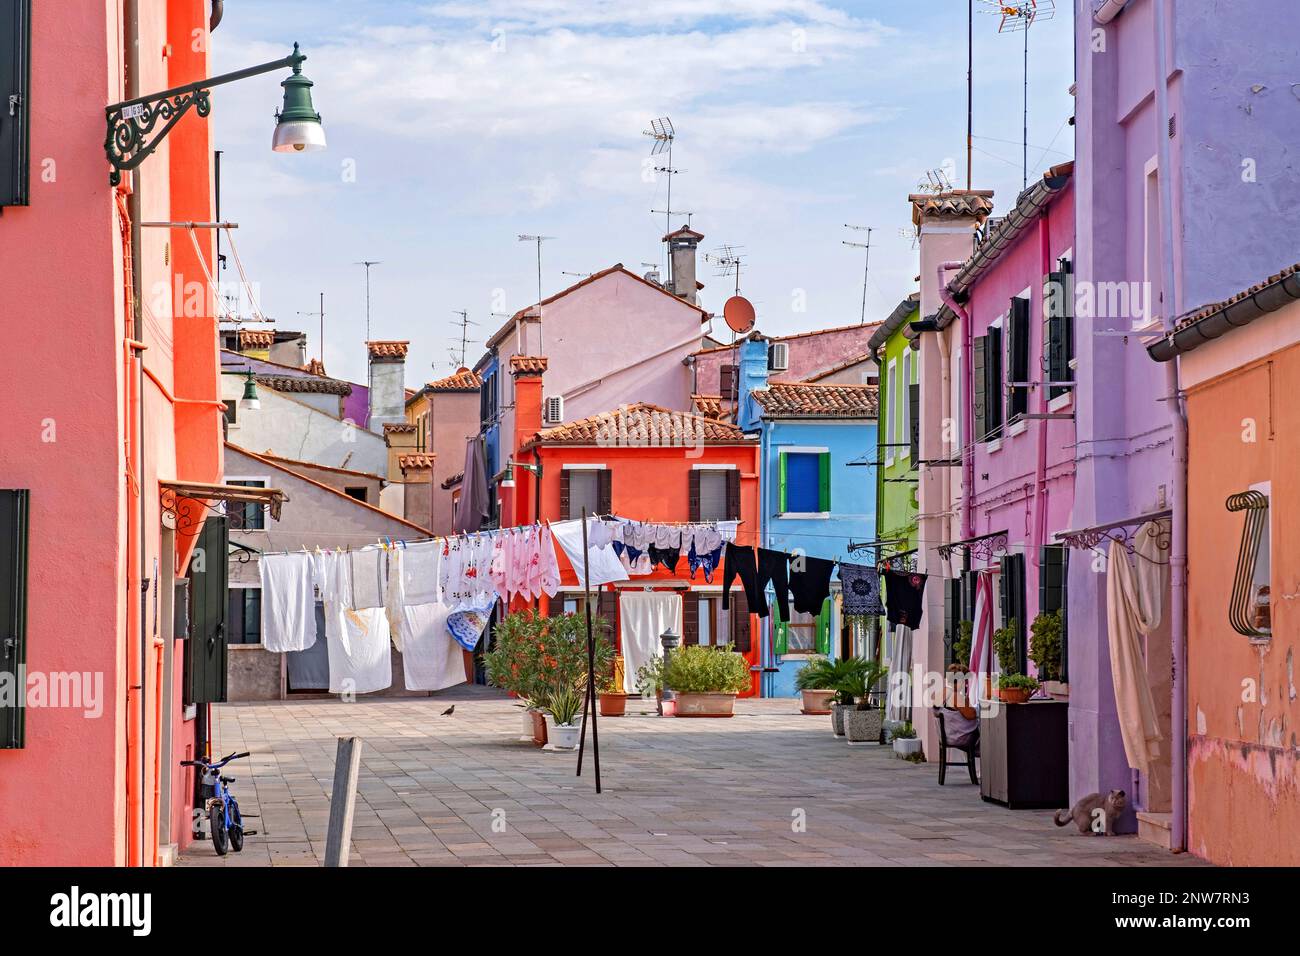 Laundry hanging to dry in alley with brightly coloured houses at Burano, island in the Venetian Lagoon near Venice, Veneto, Northern Italy Stock Photo